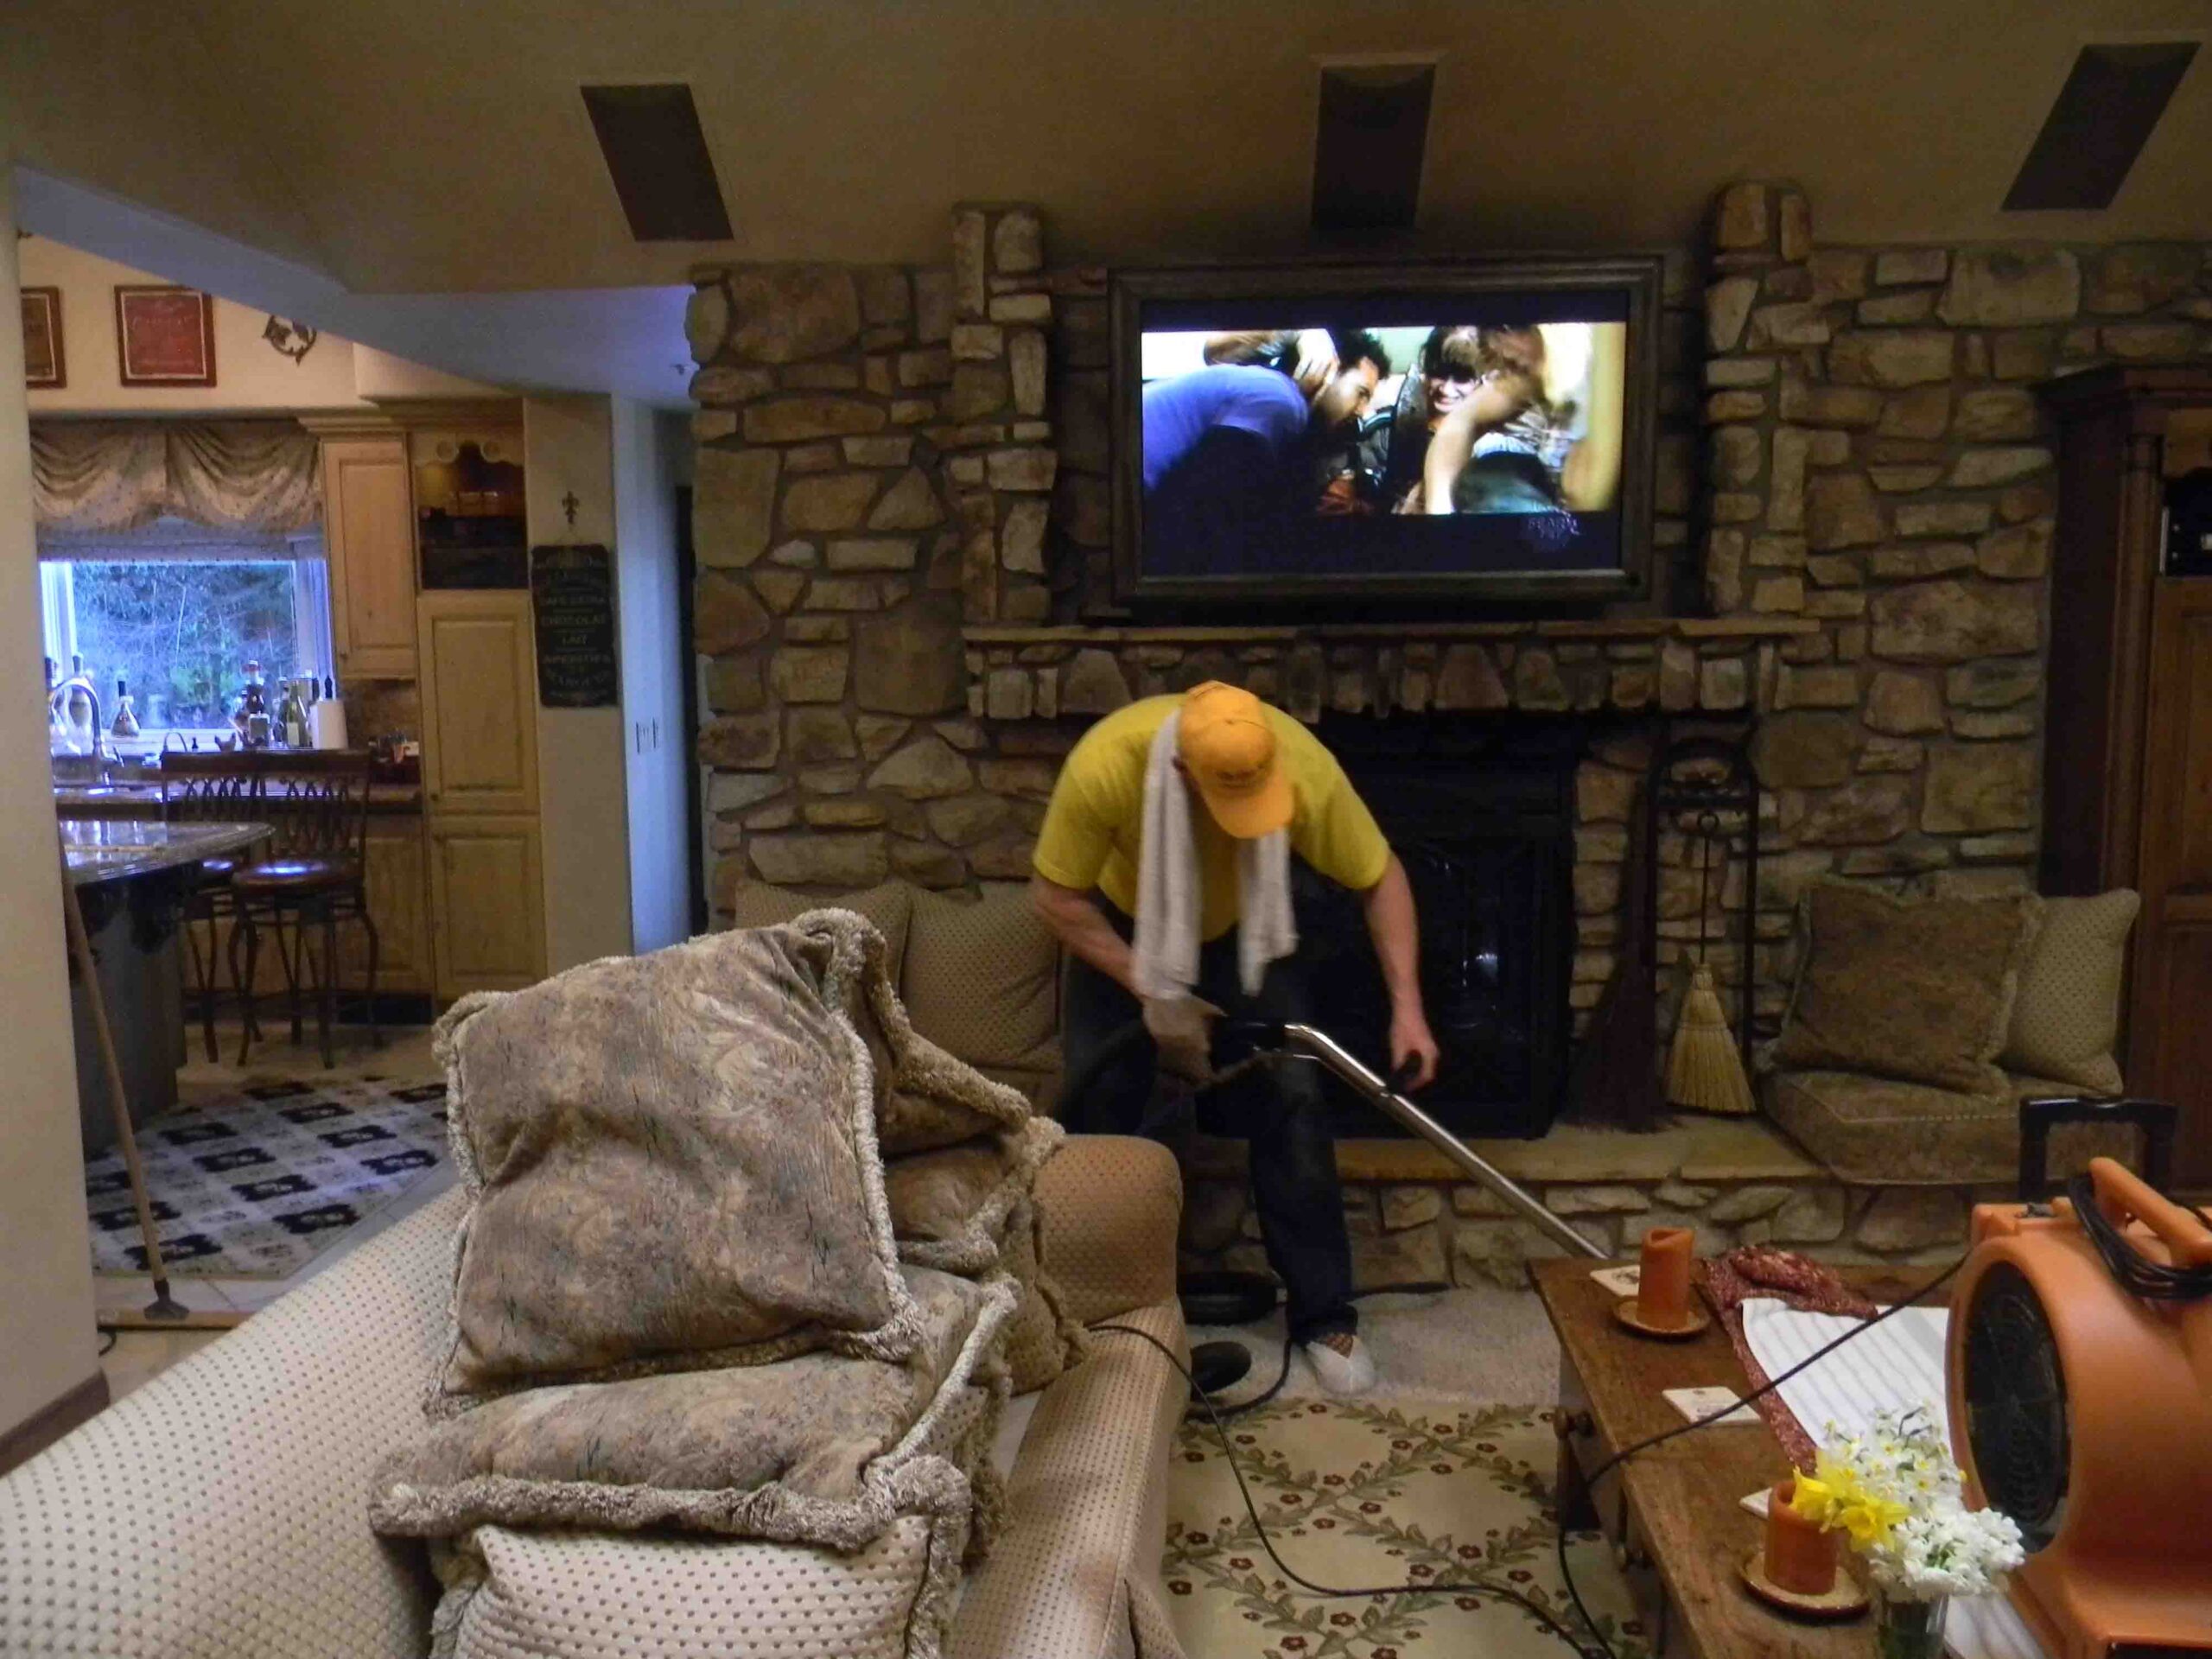 On-The-Spot Cleaning Services - Tony, owner, cleaning the living room of a mansion. His turbo-dryers are drying the couch and couch cushions, and he is steam-cleaning the carpets. Music videos are playing on the flatscreen on the wall.